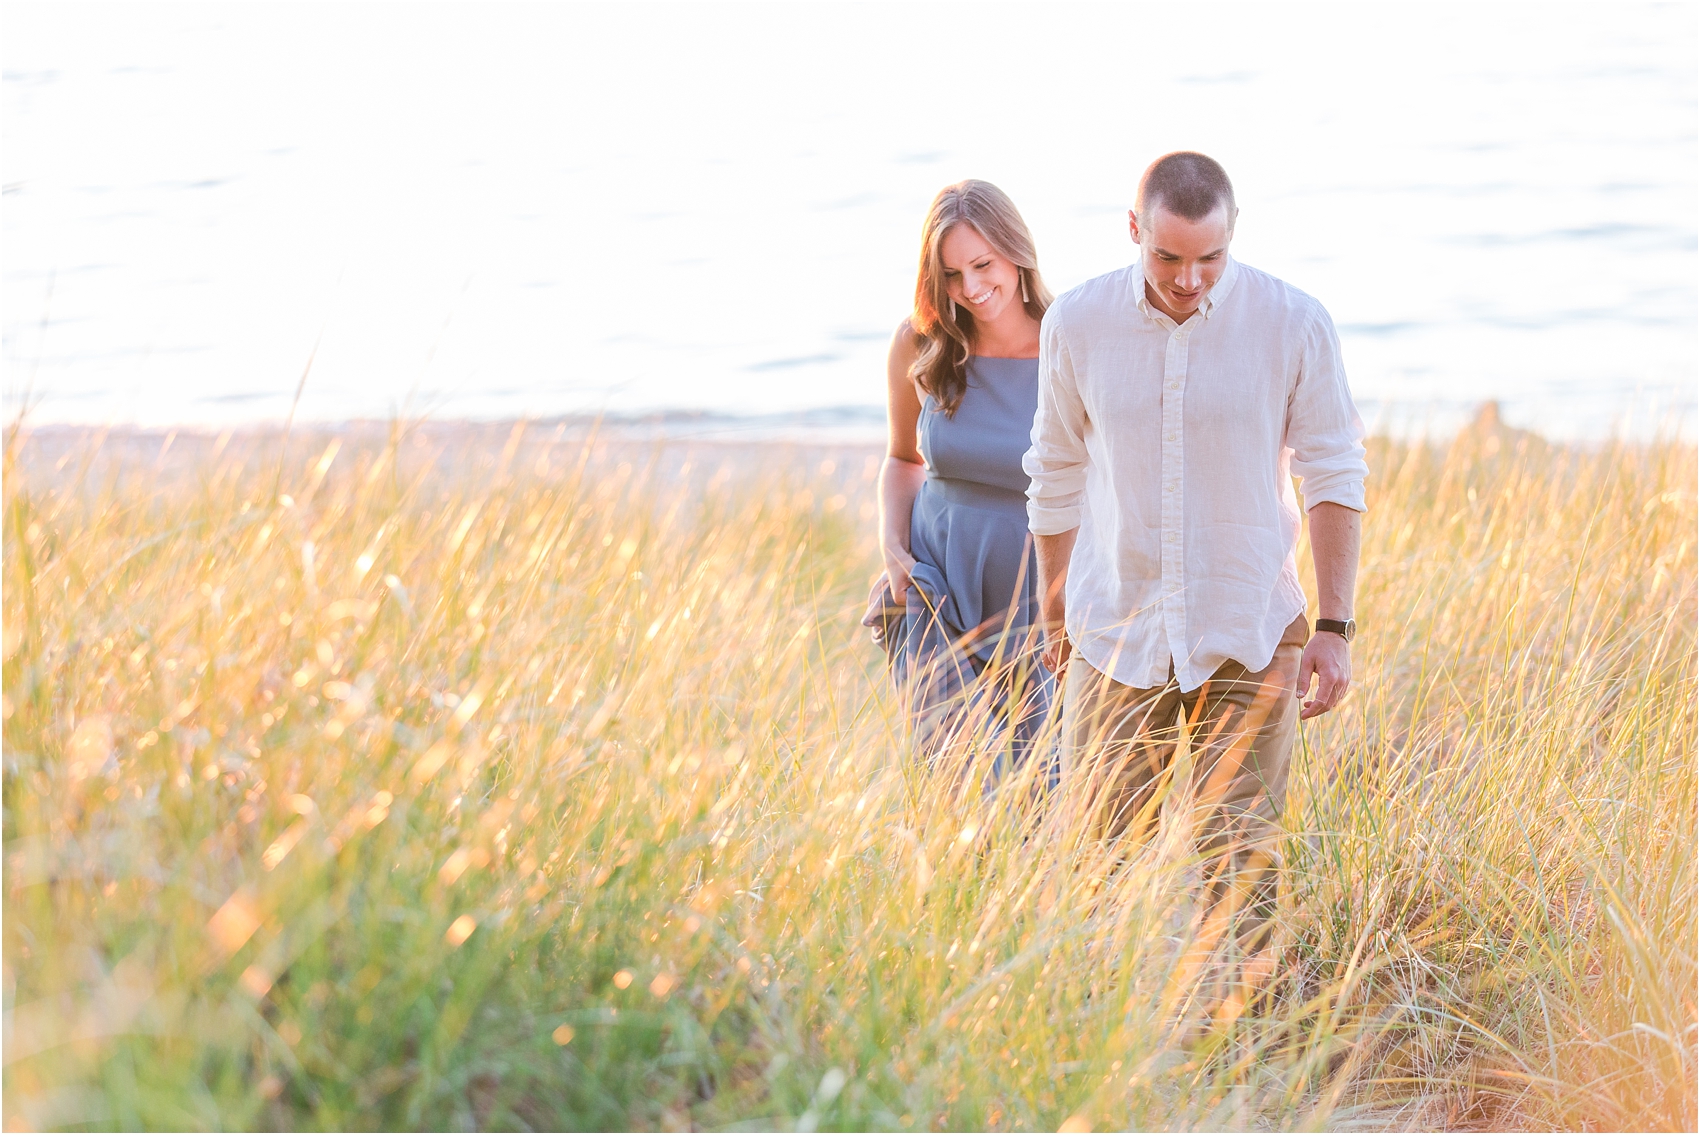 romantic-sunset-engagement-photos-at-michigan-beach-park-in-charlevoix-mi-by-courtney-carolyn-photography_0002.jpg